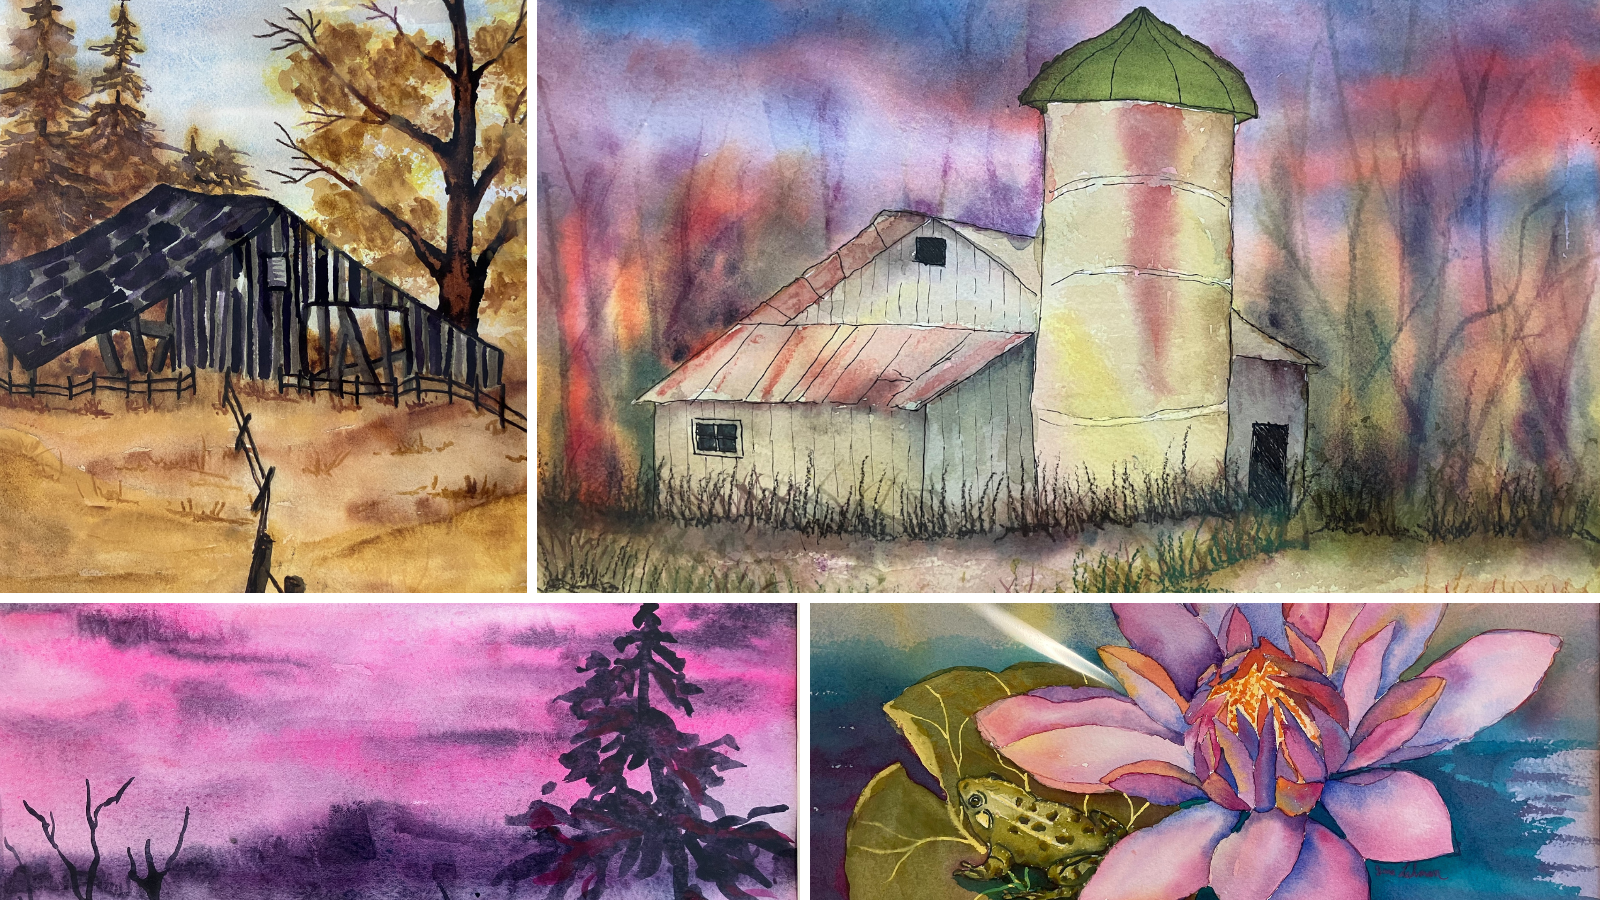 Collage of watercolour paintings. Top left is an old barn, top right is a barn with a silo in the foreground, bottom left is a sunset with a tree in silhouette, and bottom right is a lotus flower with frog.